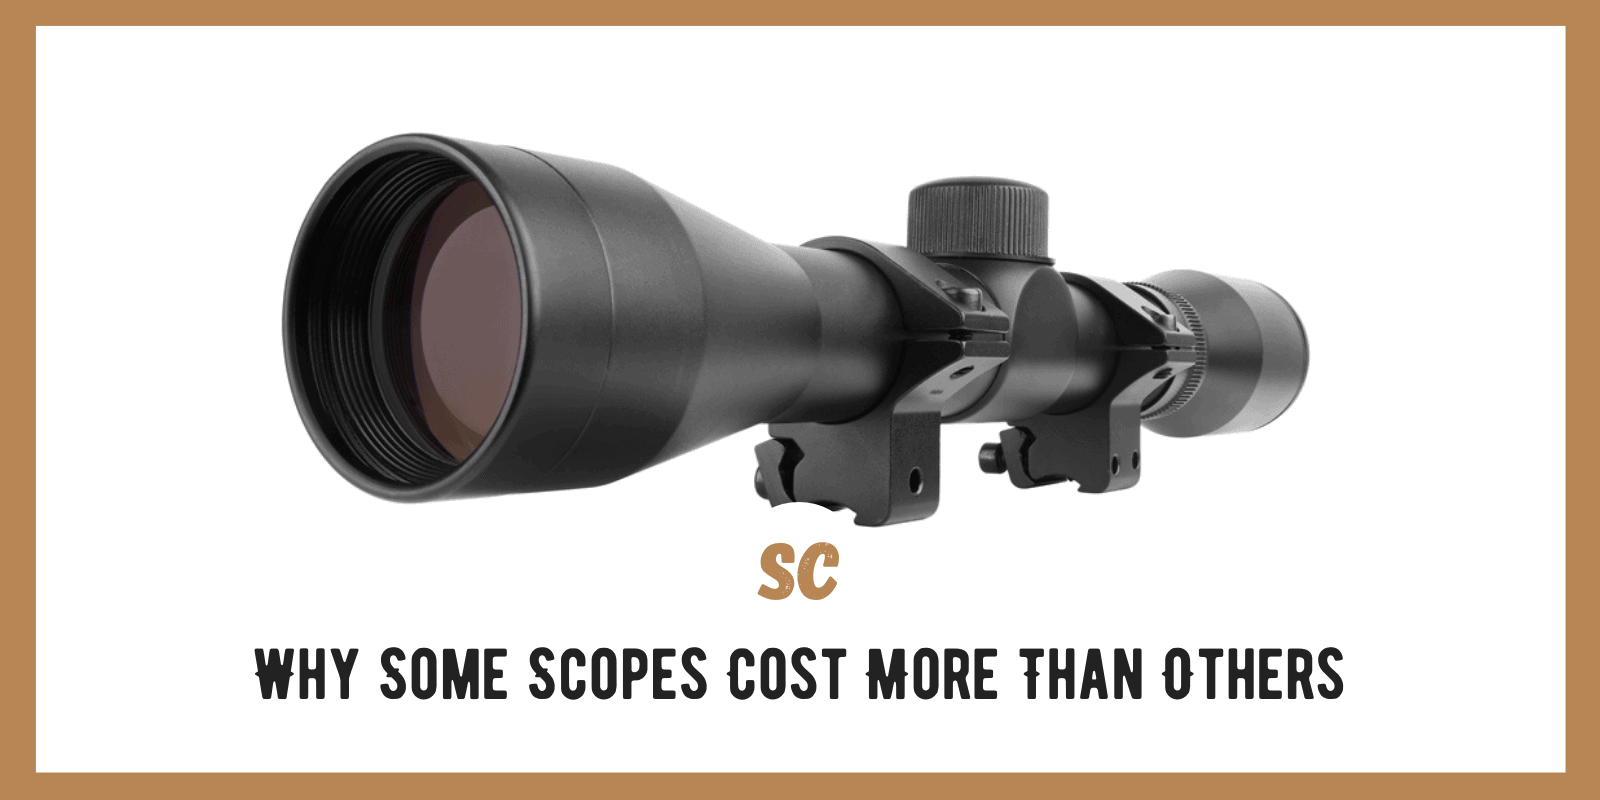 Why Some Scopes Cost More Than Others? (Hint: Good Scopes Cost More!)